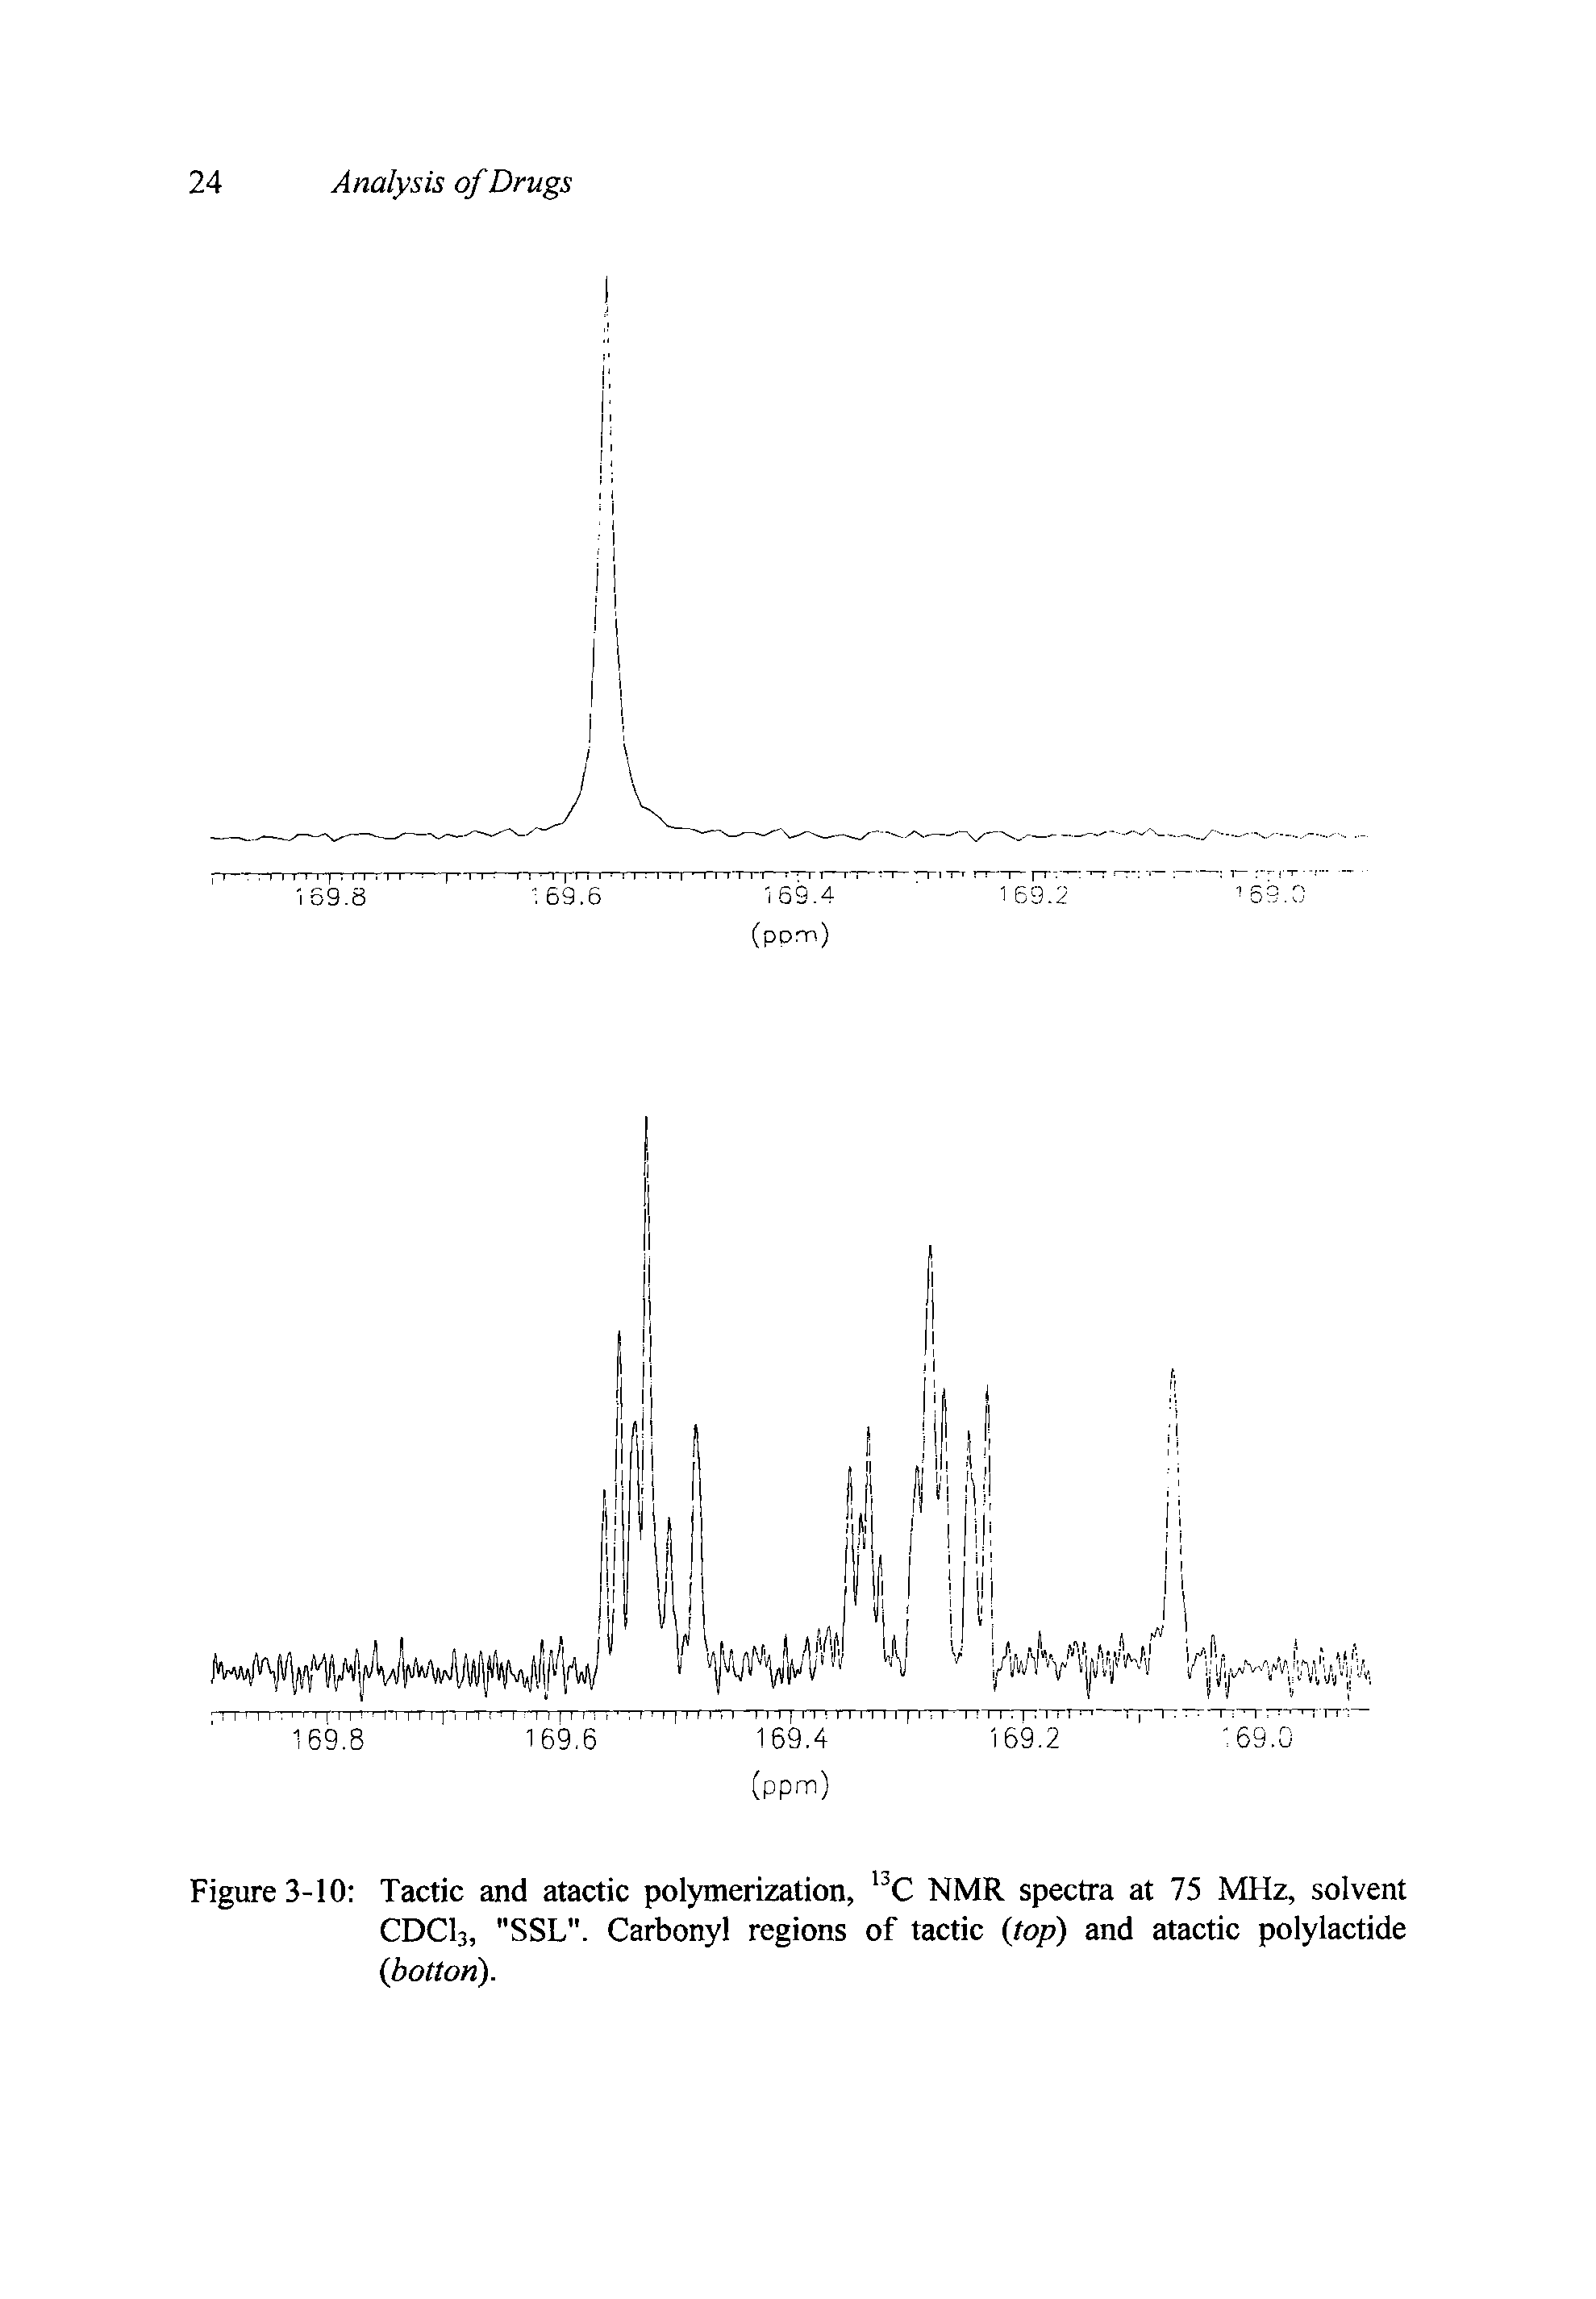 Figure 3-10 Tactic and atactic polymerization, C NMR spectra at 75 MHz, solvent CDCI3, "SSL". Carbonyl regions of tactic (top) and atactic polylactide (botton).